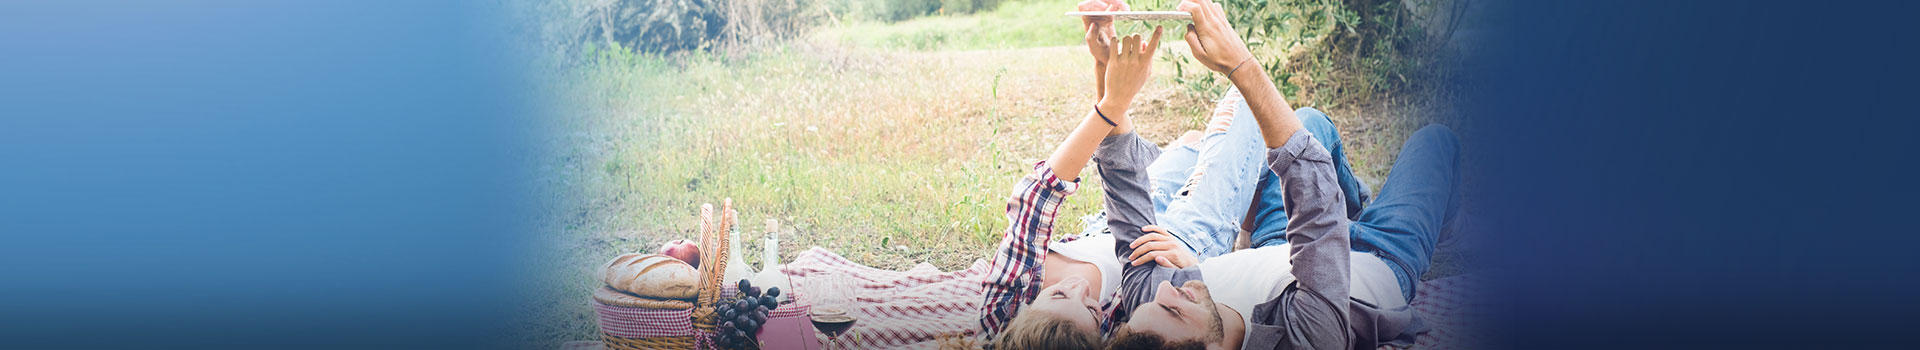 Young couple on picnic blanket looking at something on mobile phone